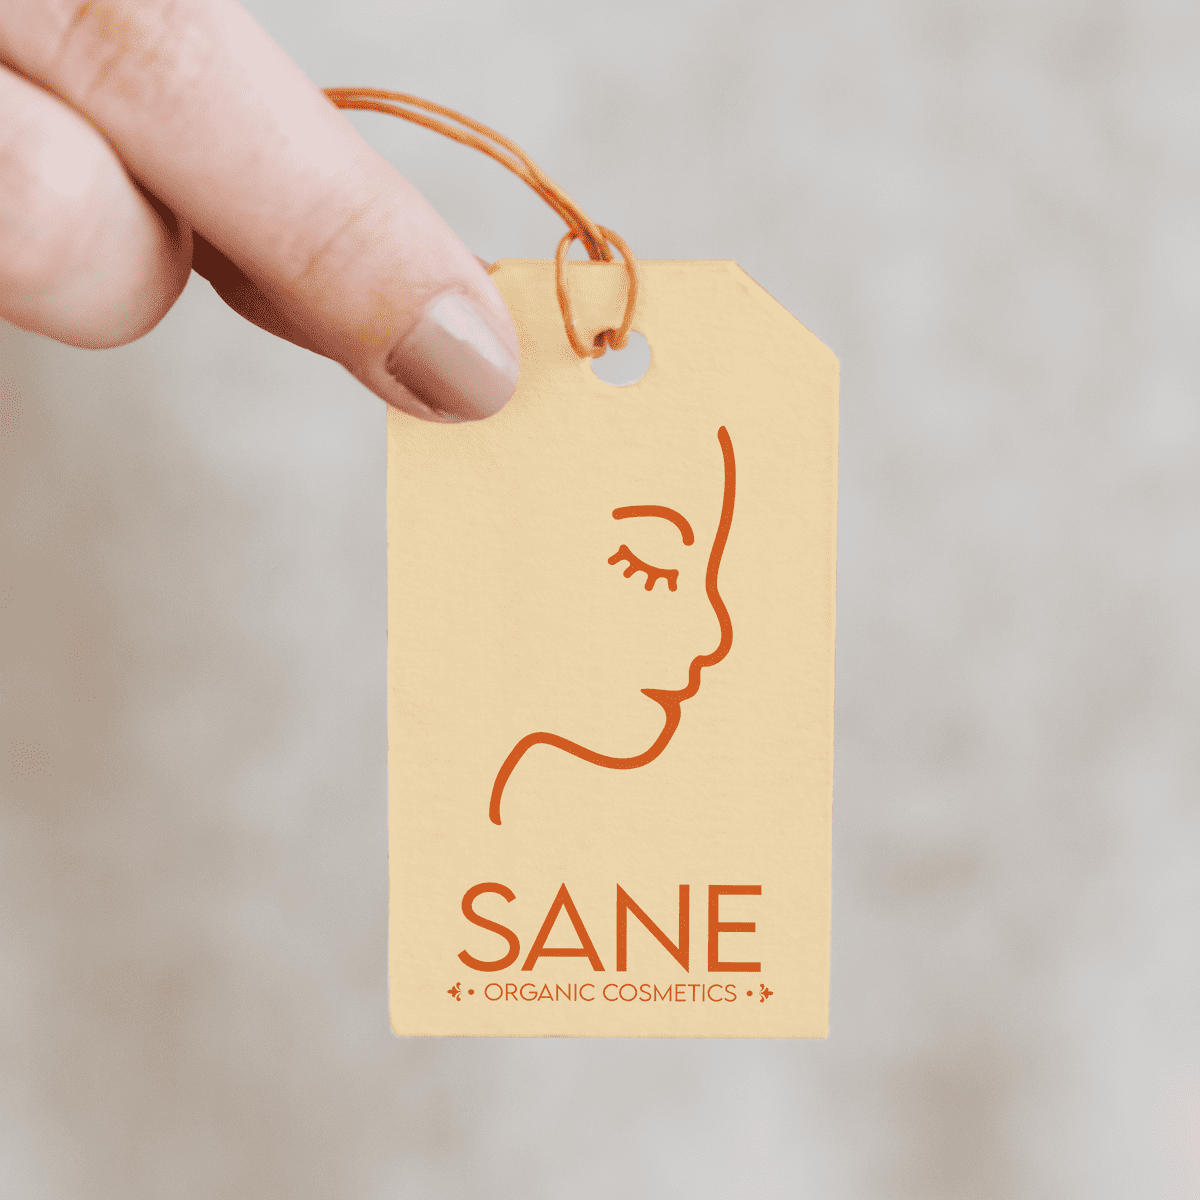 Yellow pastel tag of organic cosmetics, with brand logo and name in orange